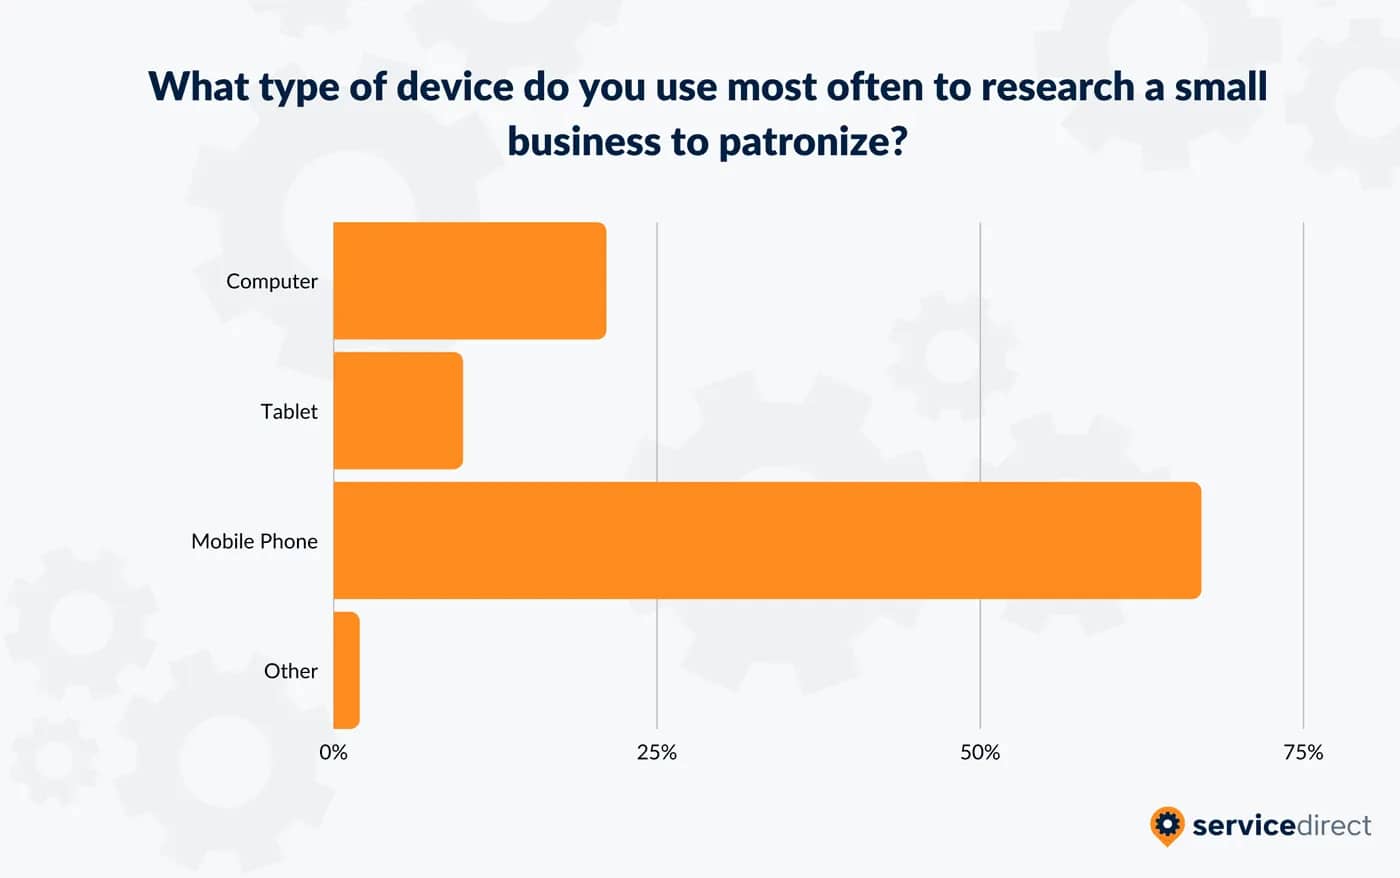 An overwhelming majority of consumers use a mobile phone to research a small business to patronize. 